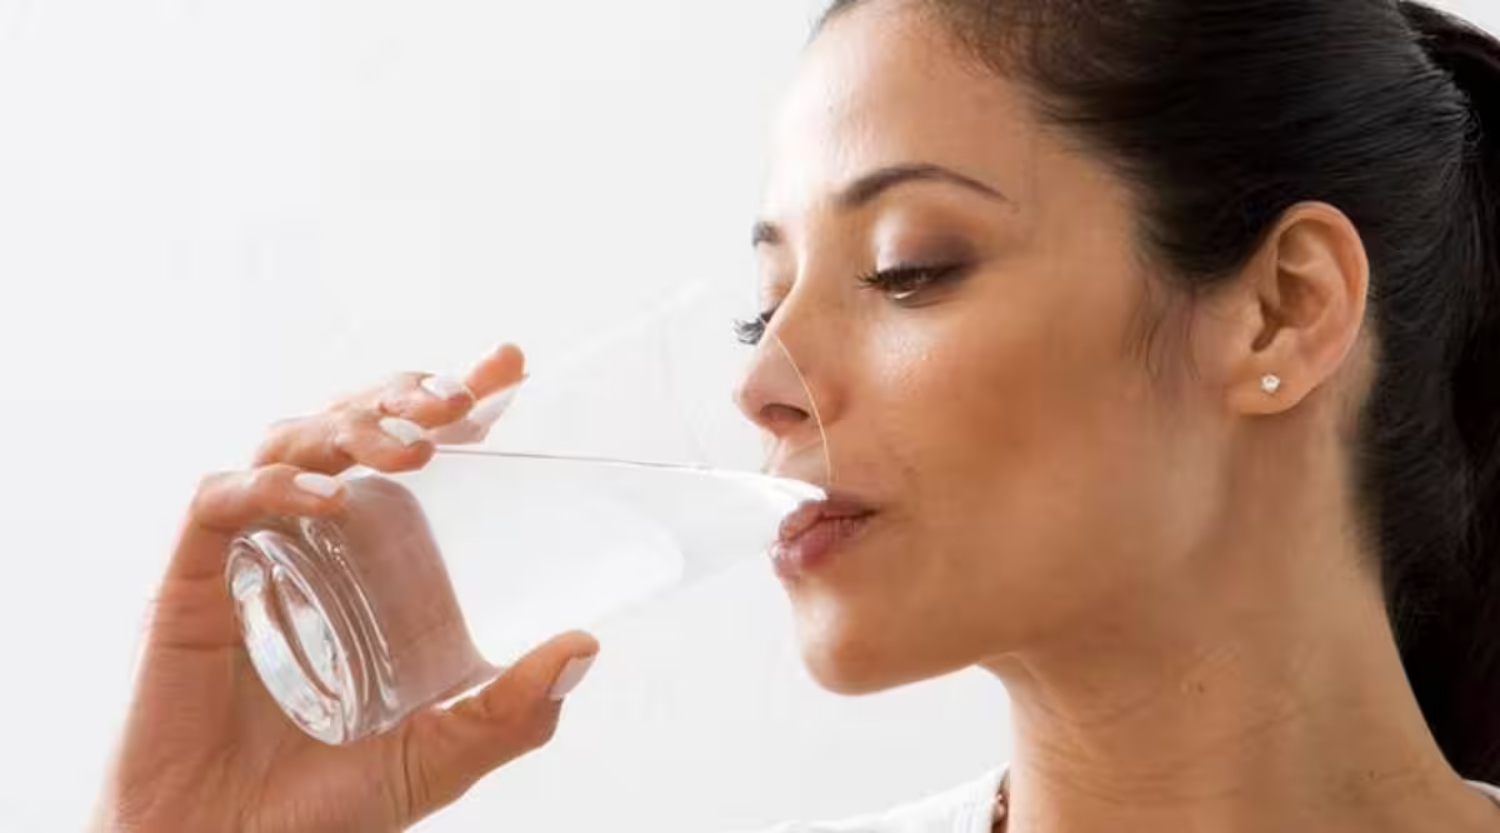 Do you really need eight glasses of water? How much should you drink?